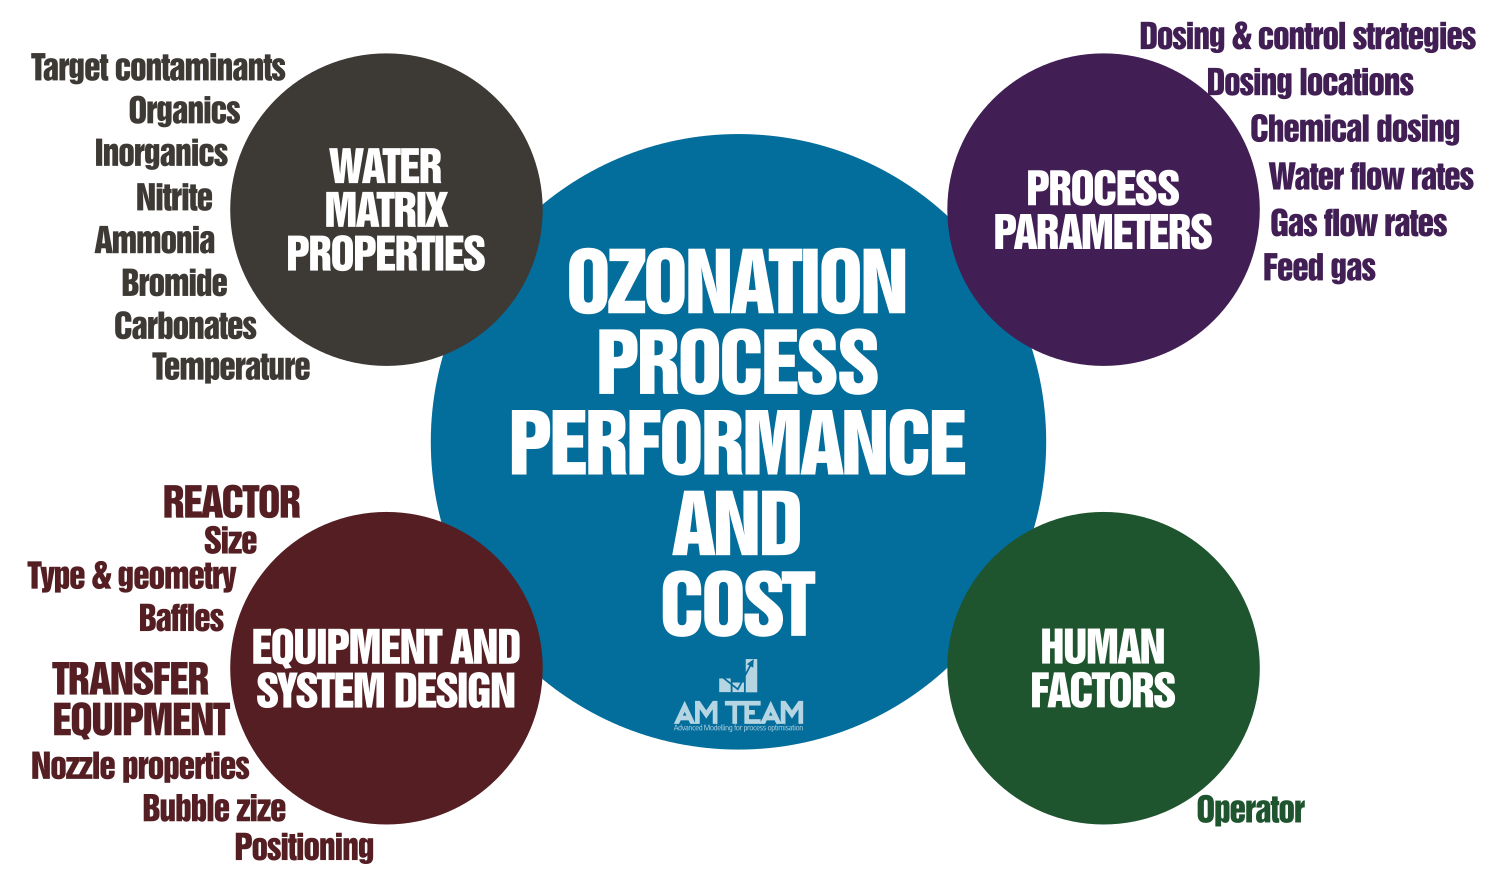 Key aspects driving the cost and performance of ozonation and ozone treatment